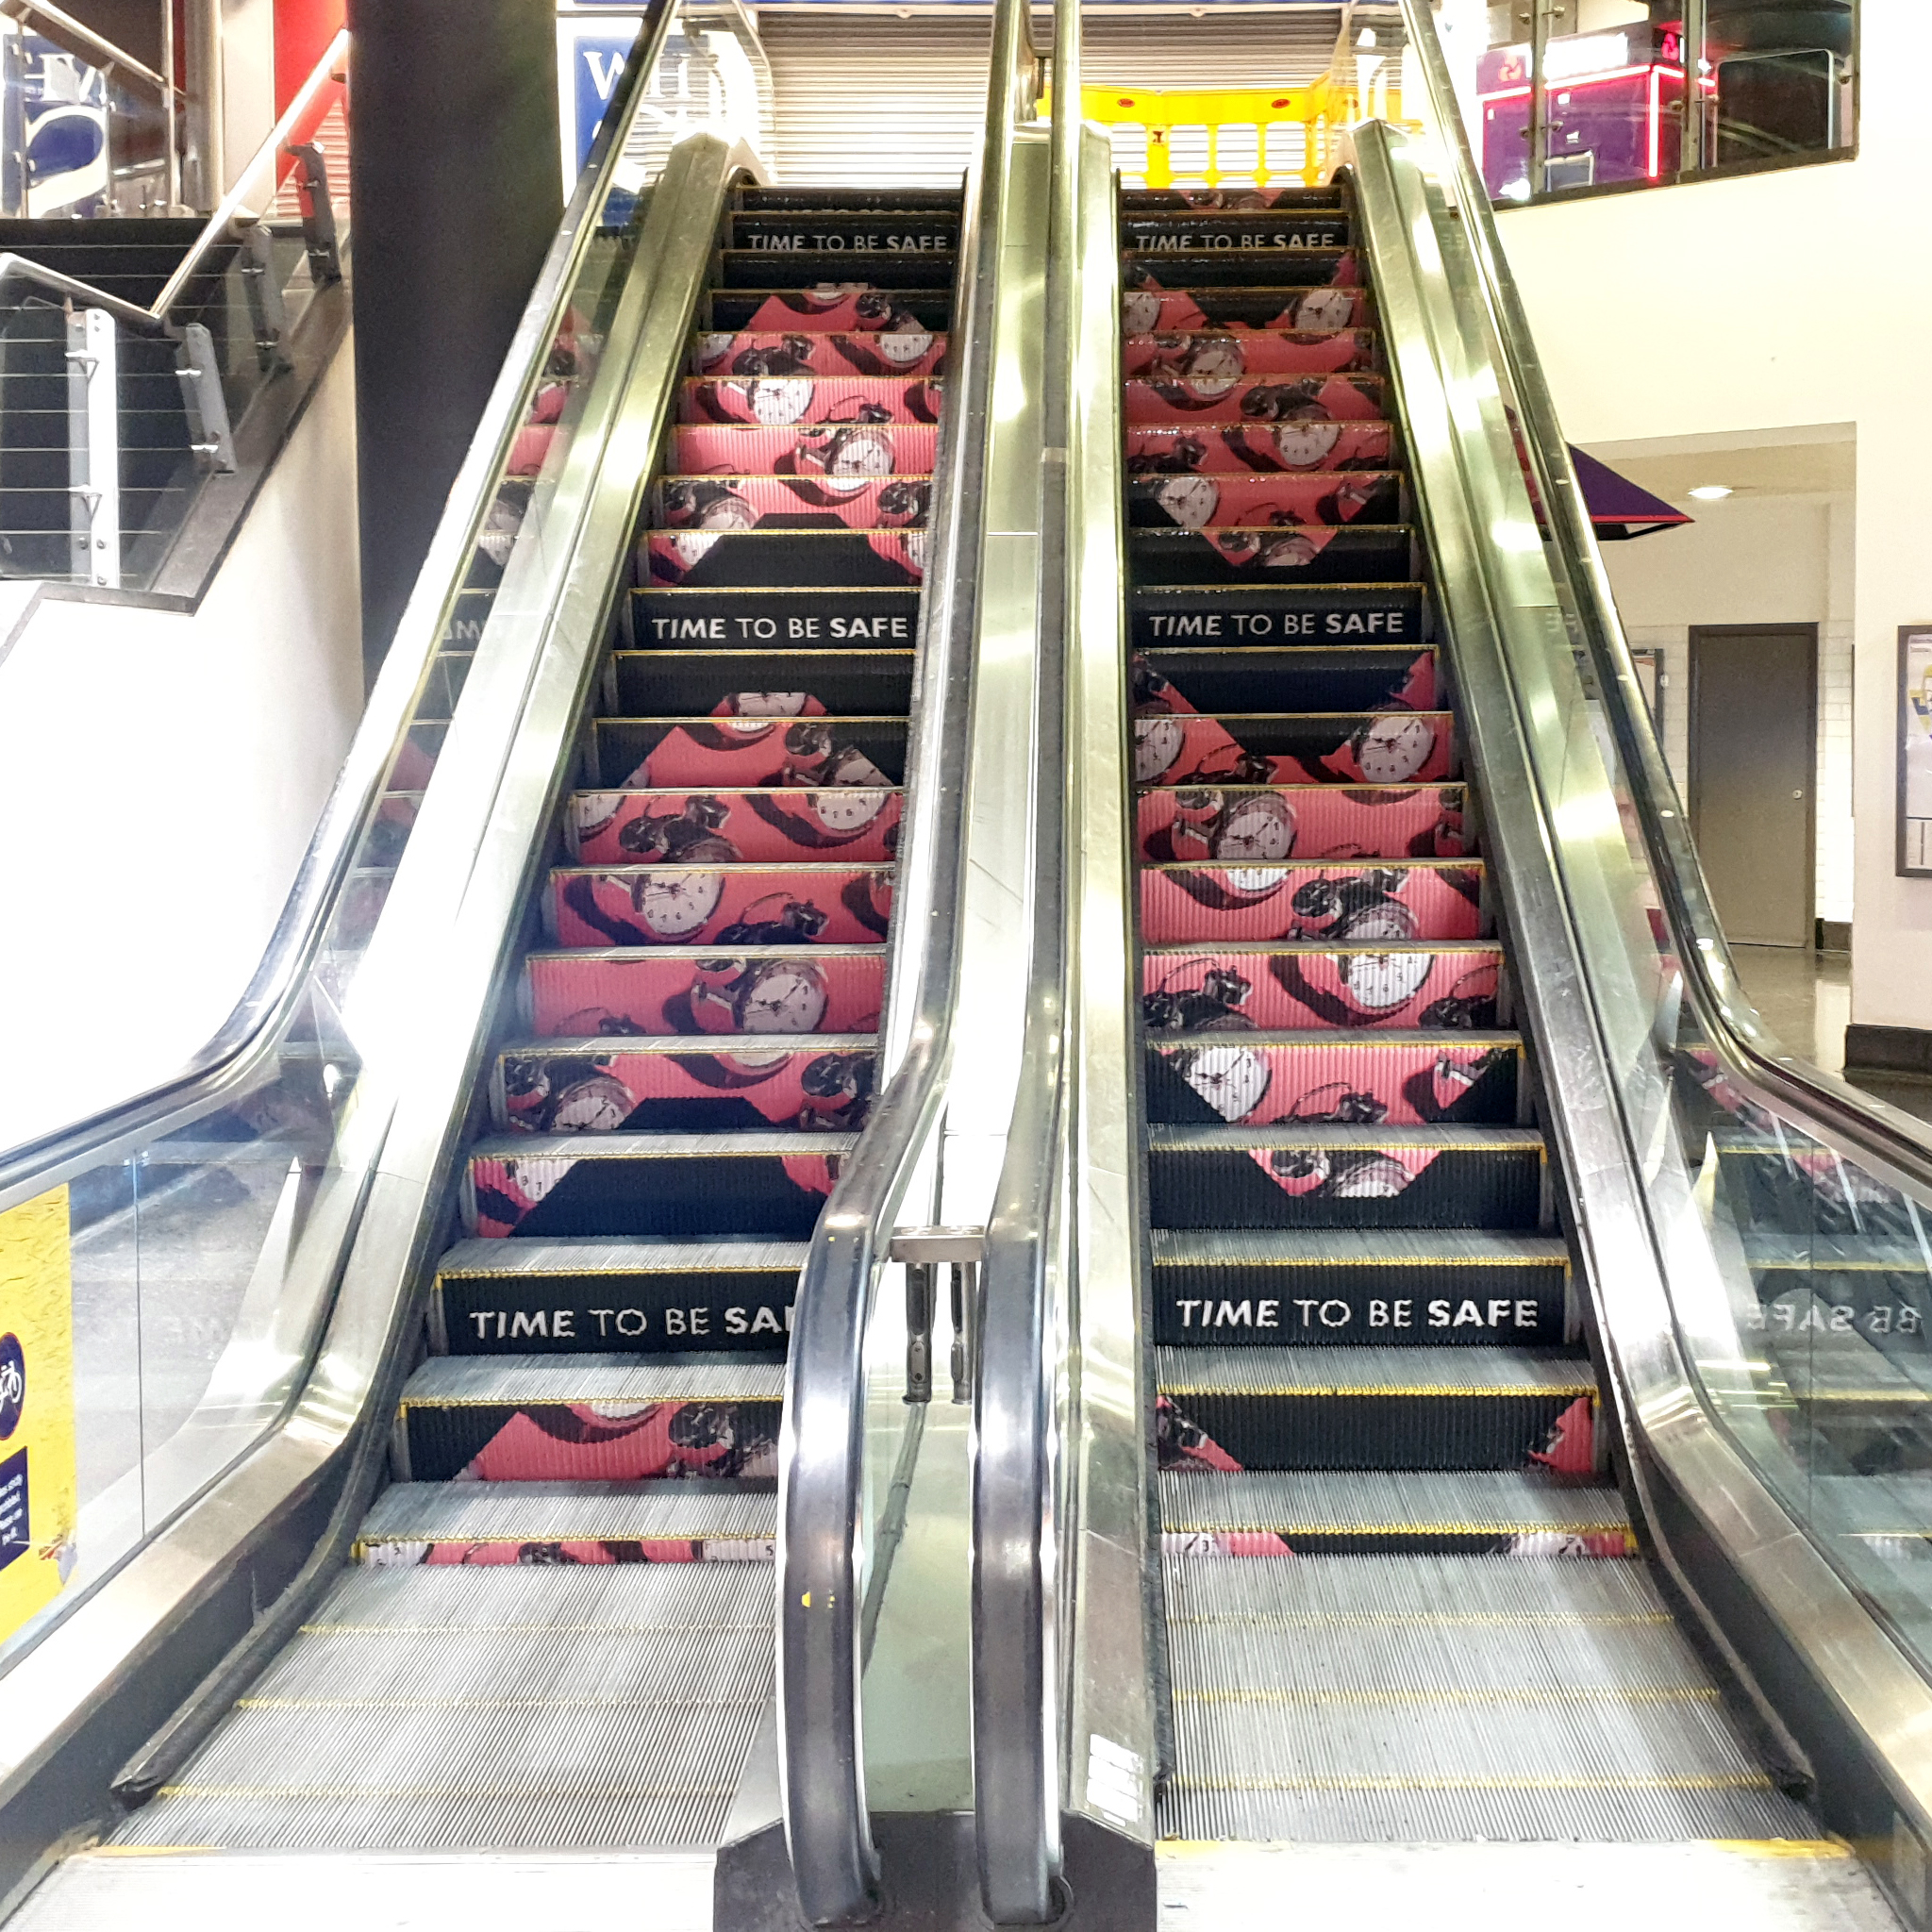 Network Rail Escalator Safety Campaign Manchester Piccadilly Station